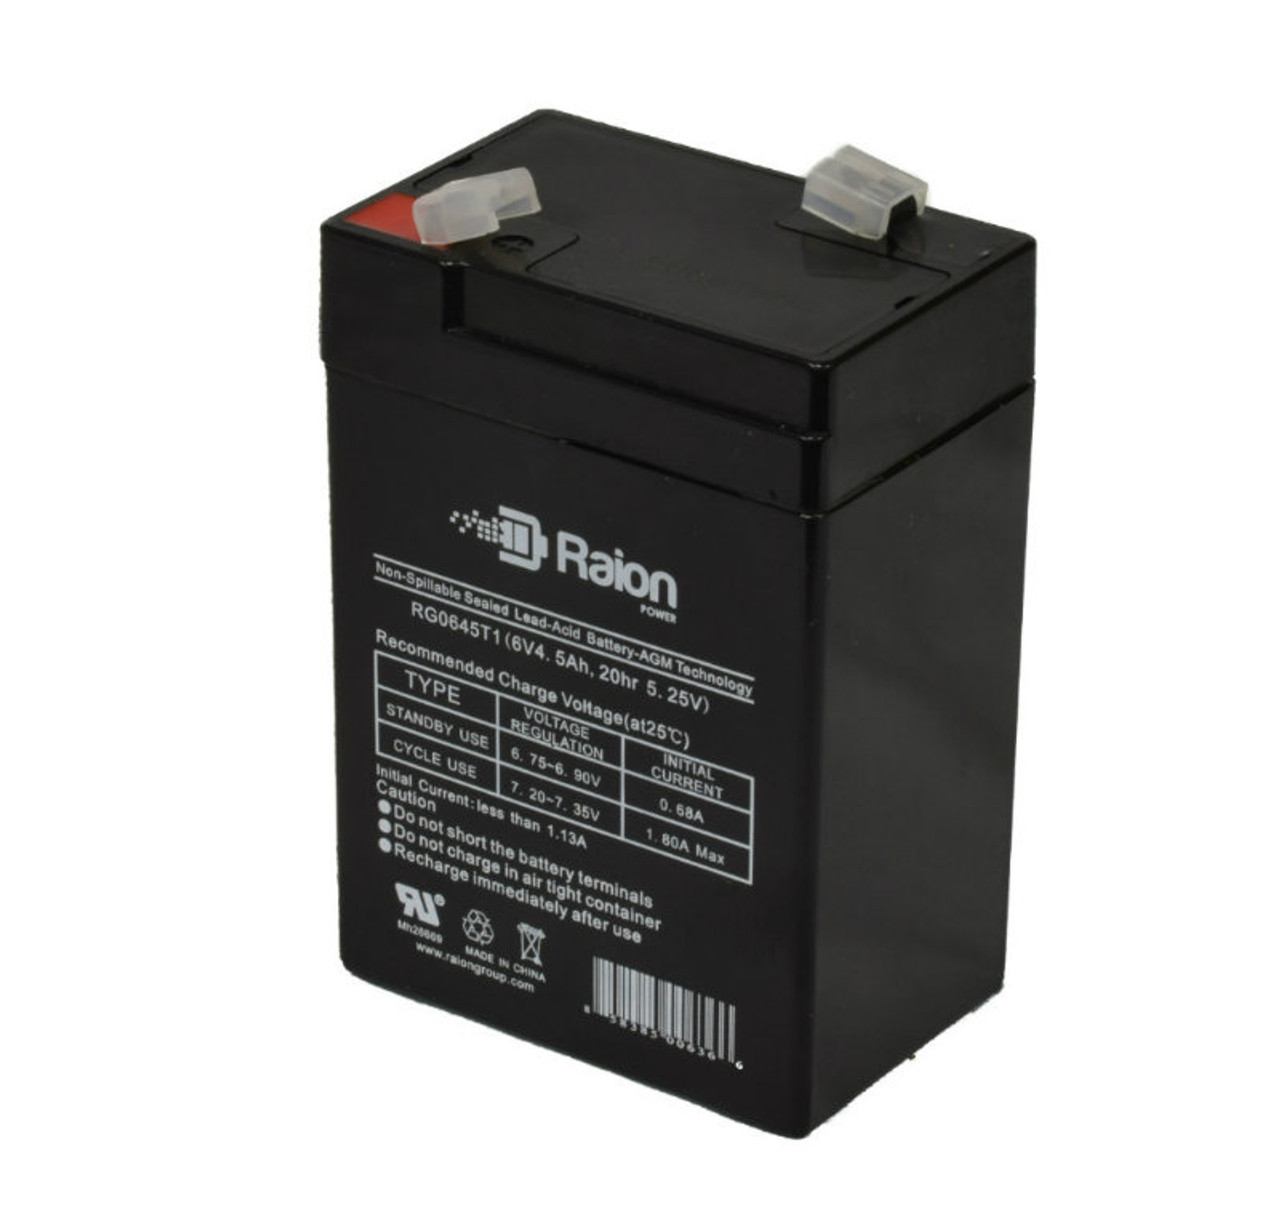 Raion Power RG0645T1 6V 4.5Ah Replacement Battery Cartridge for Chiway SJ6V5Ah